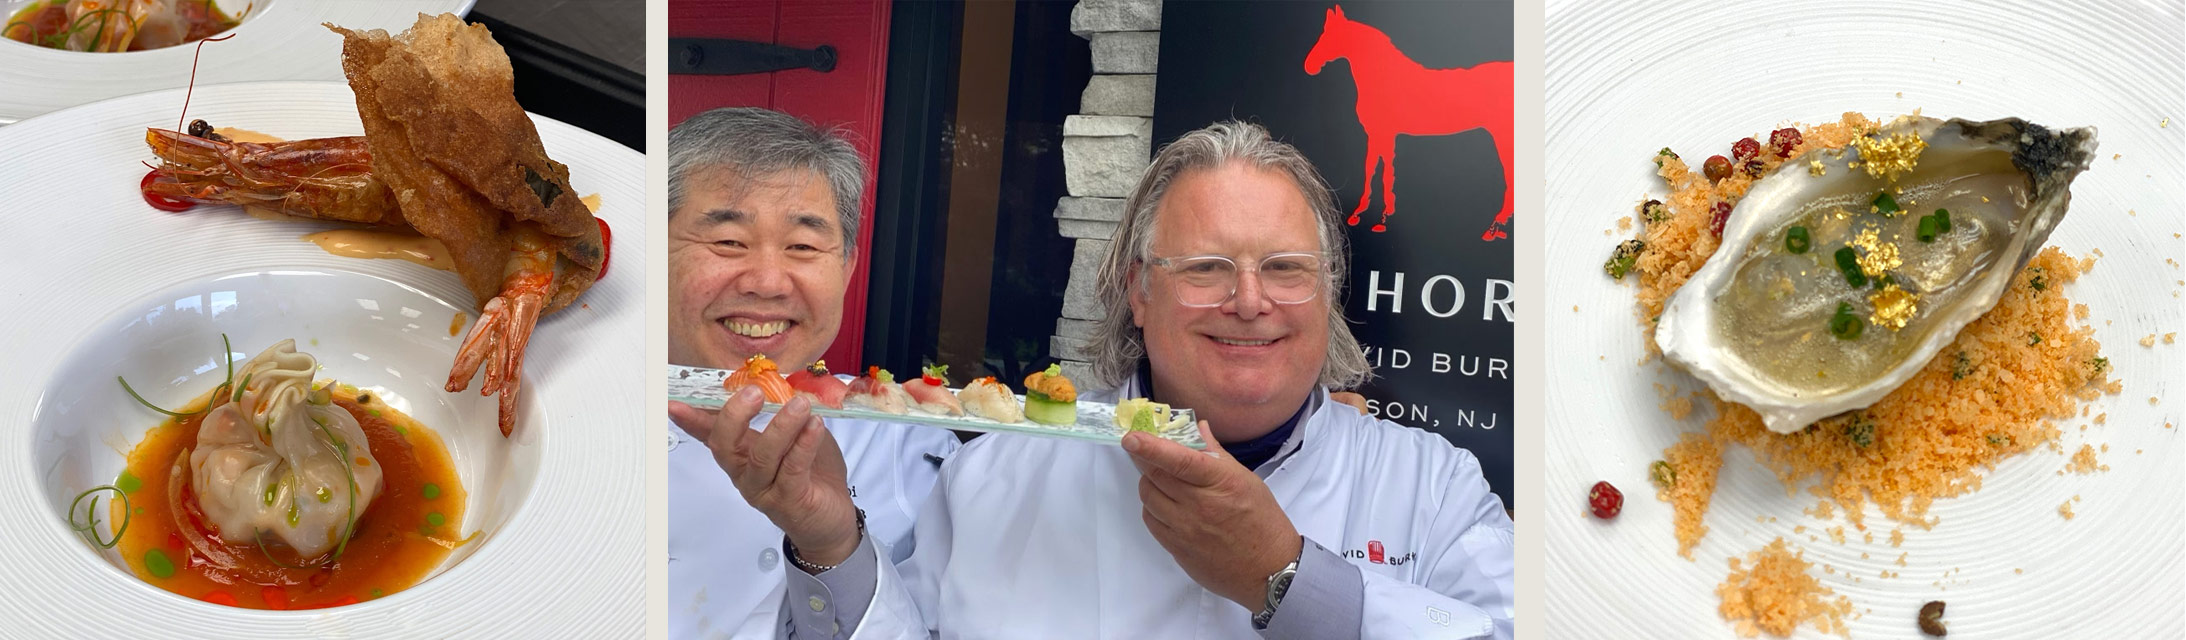 Omakase with Chef David Burke at Red Horse